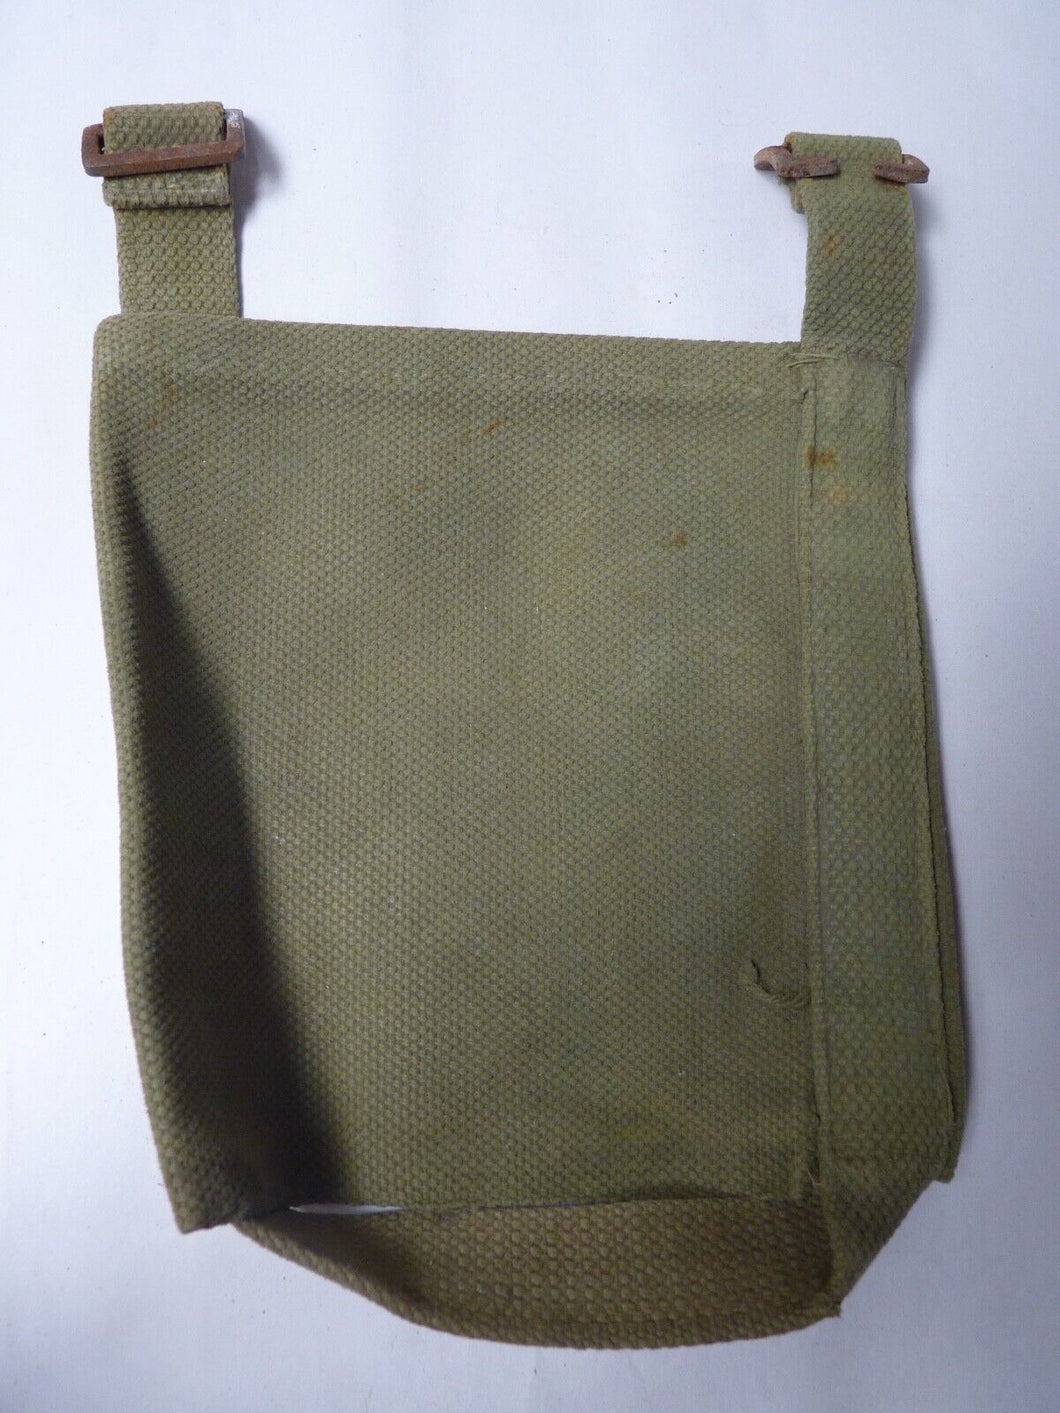 Original WW2 British Army Soldiers Water Bottle Carrier Harness - Dated 1941